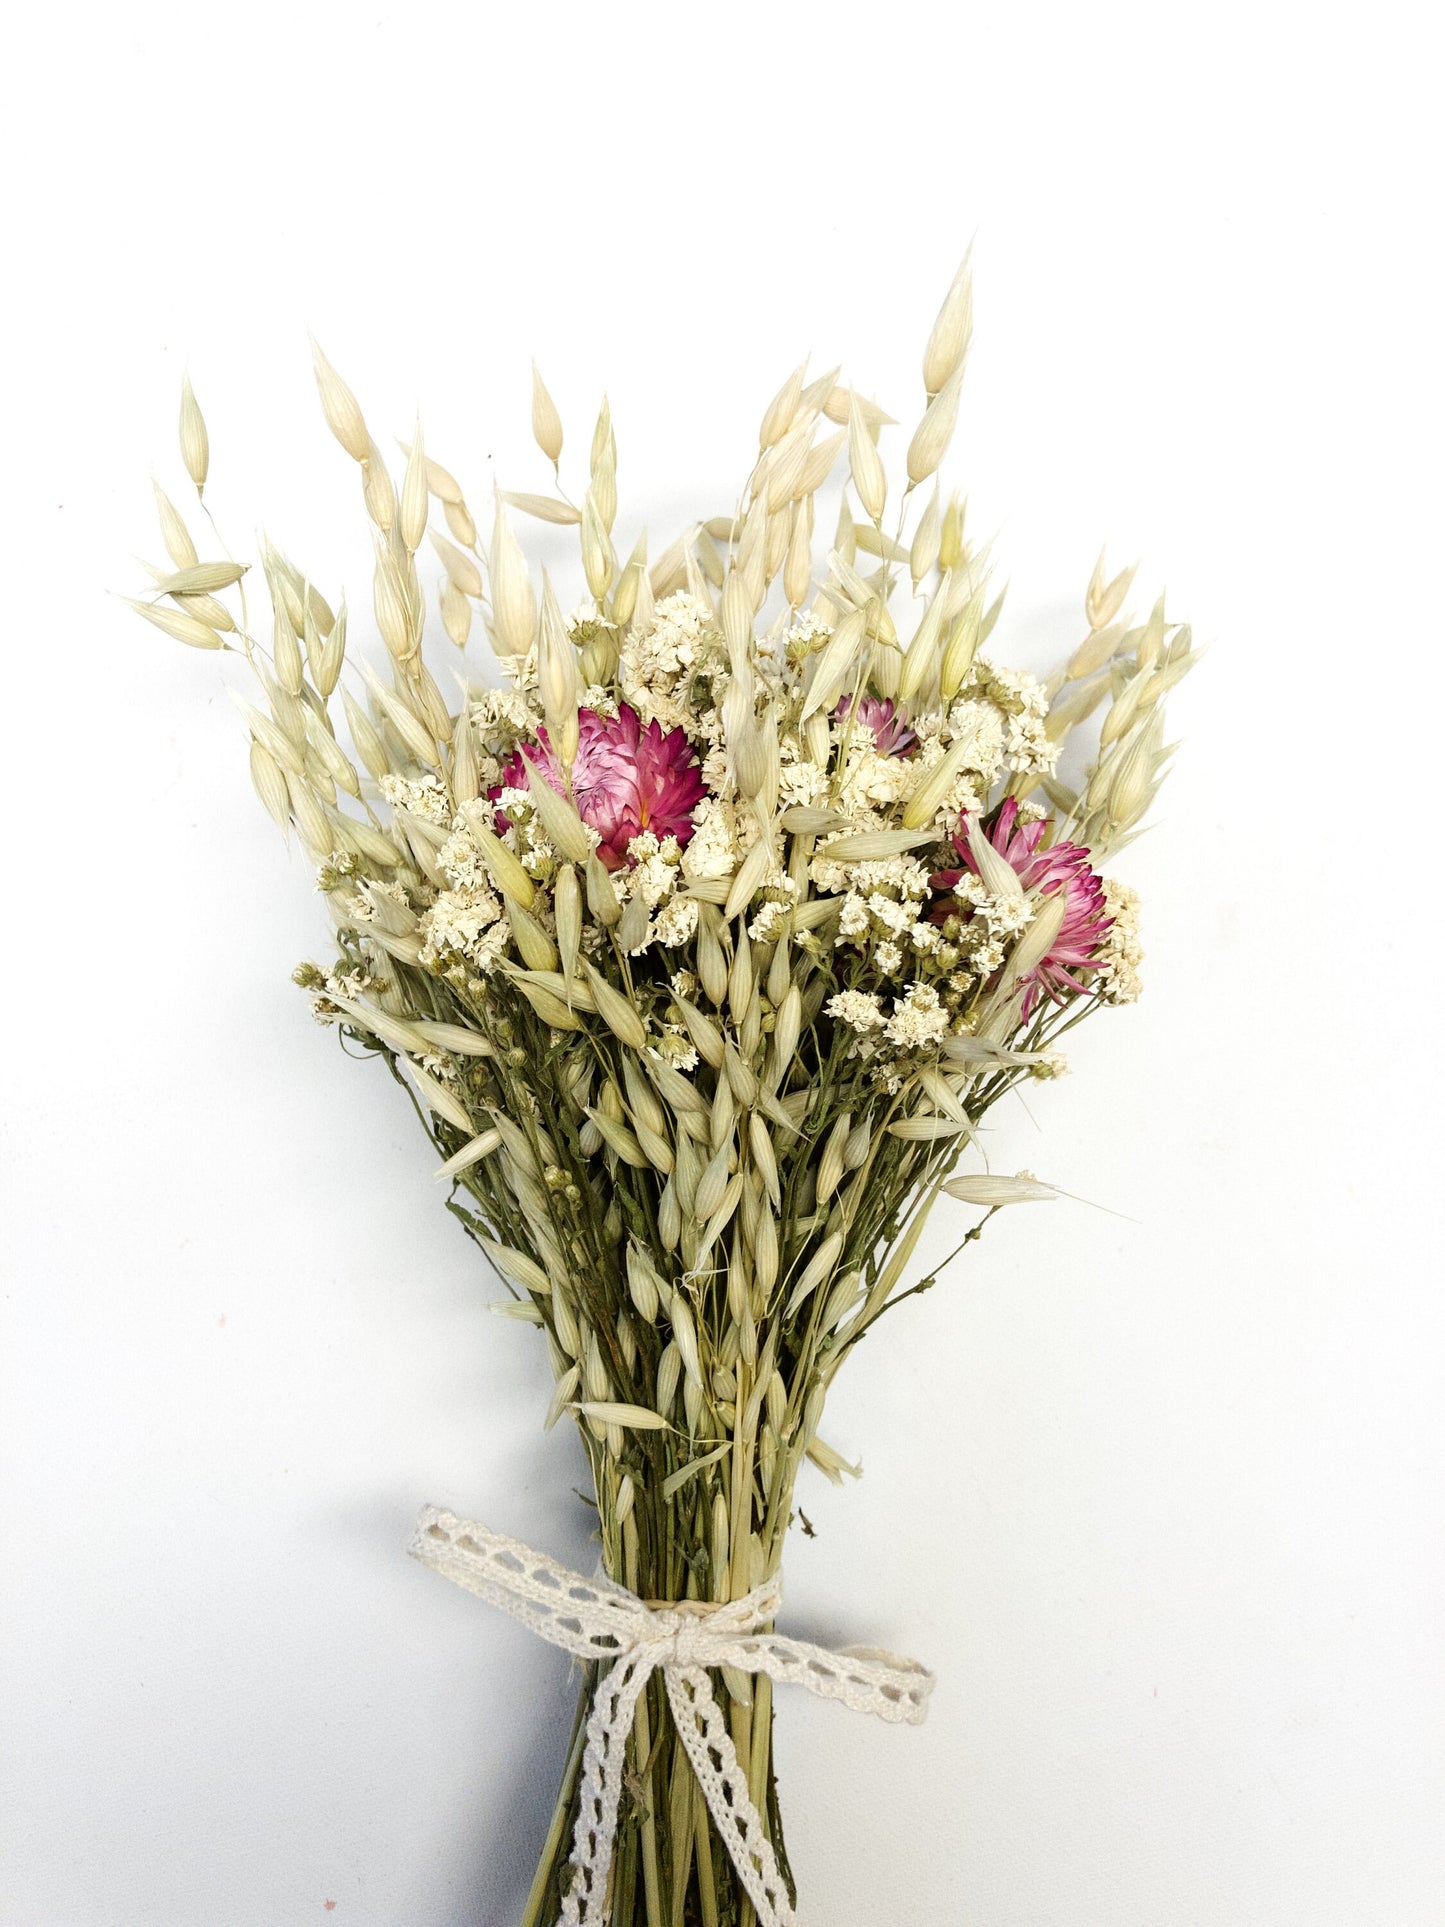 Wedding Bouquet, Floral Arrangement, Spring Colors, Wheat, Fall, Spring, House Decor, Dried Flowers, Preserved Floral, White and Purple